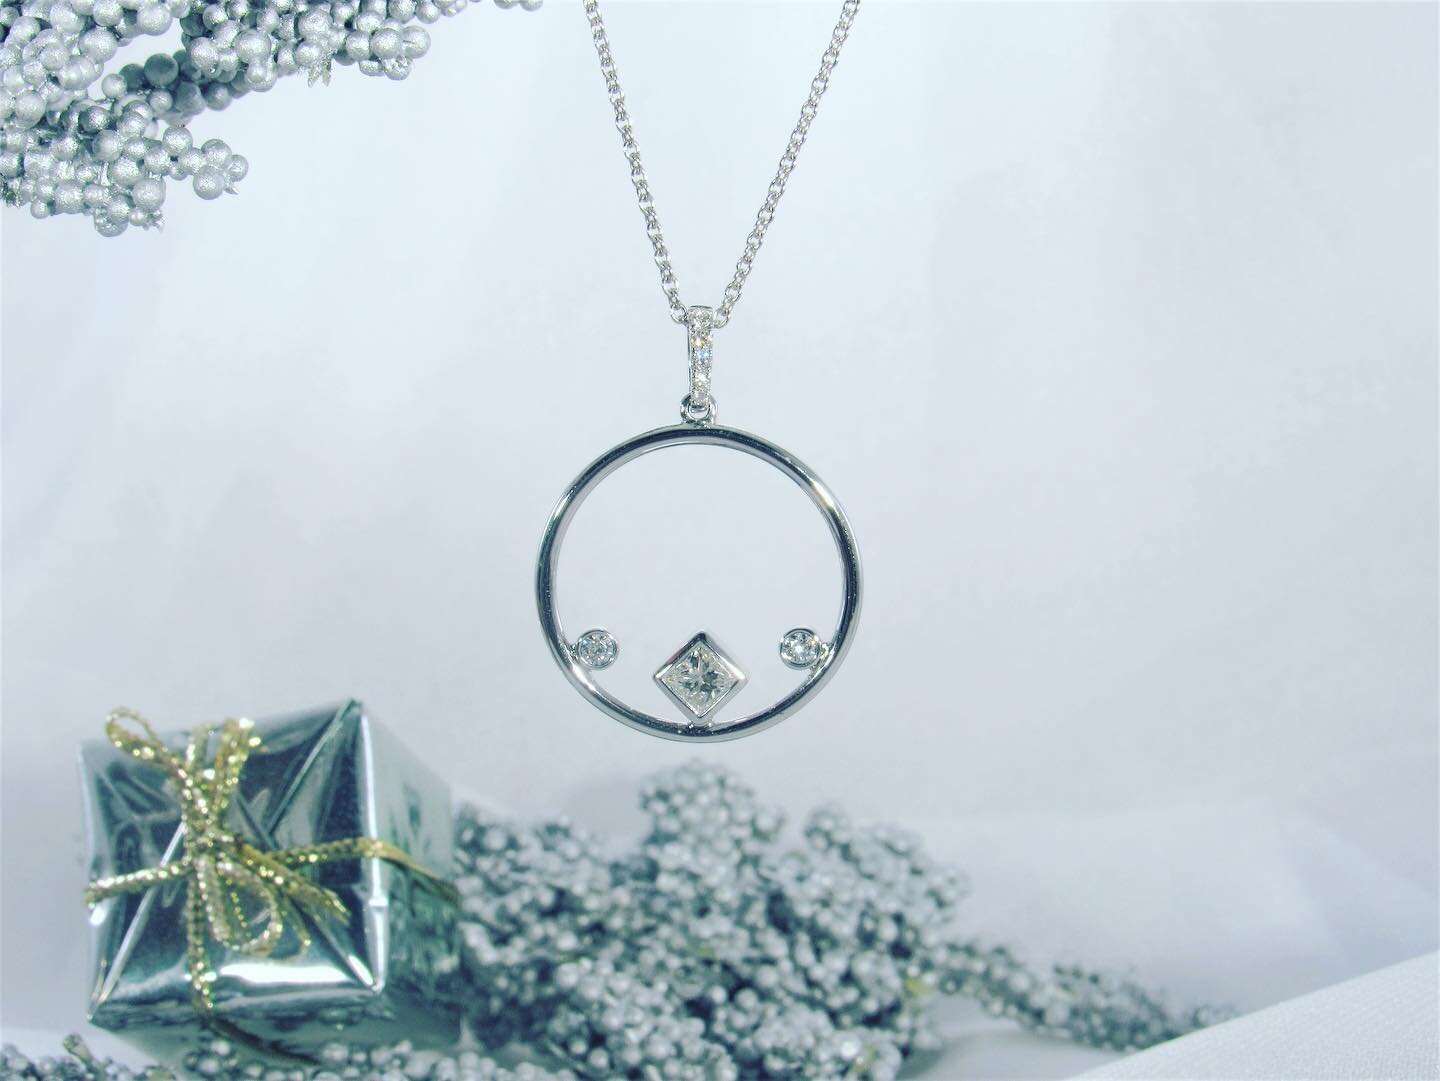 Let the the year come full circle with our  unique spin on the traditional!  A sparkling addition to holiday silver &amp; gold.

💎We will be open today, 10am until 530pm &amp; Christmas Eve 10am until 2pm.  Stop in and check off your list!

#thejewe